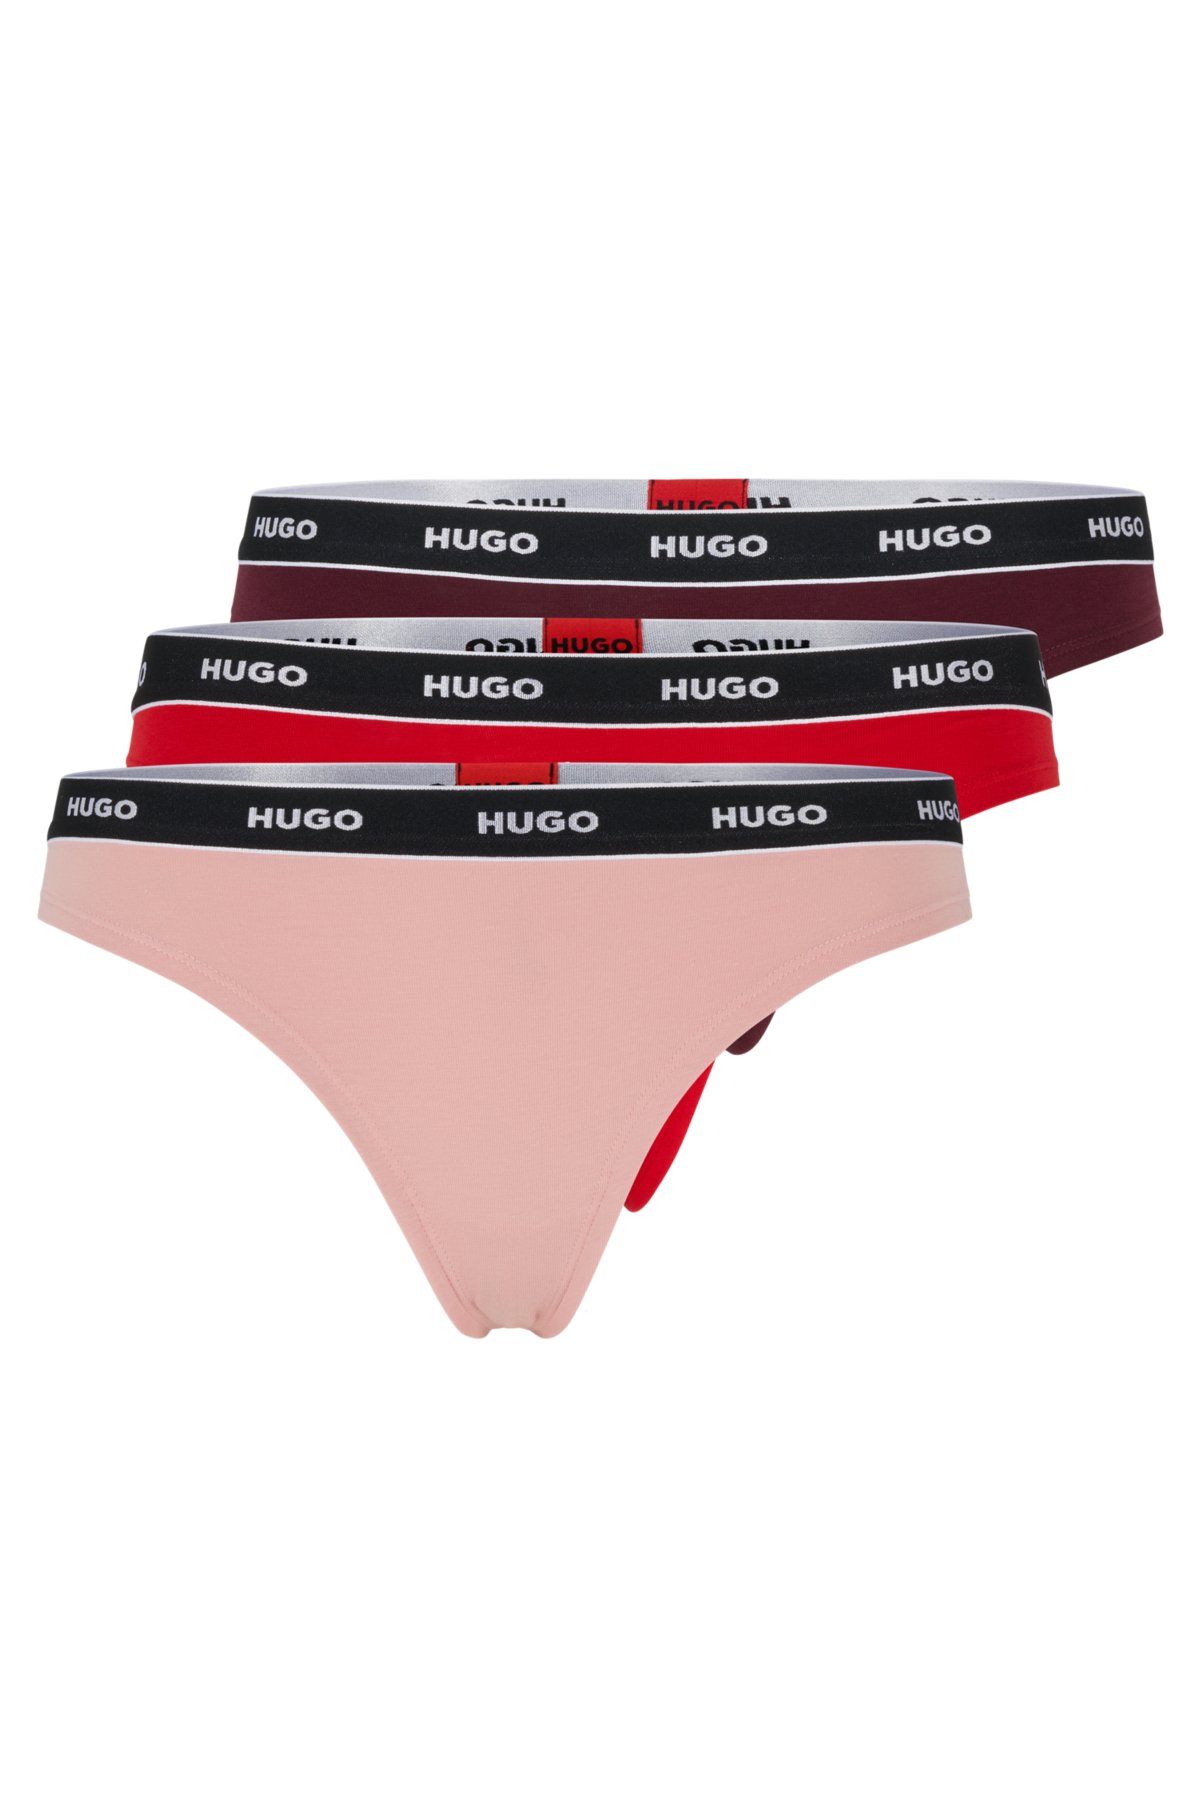 - HUGO briefs logos of thong with stretch-cotton Three-pack